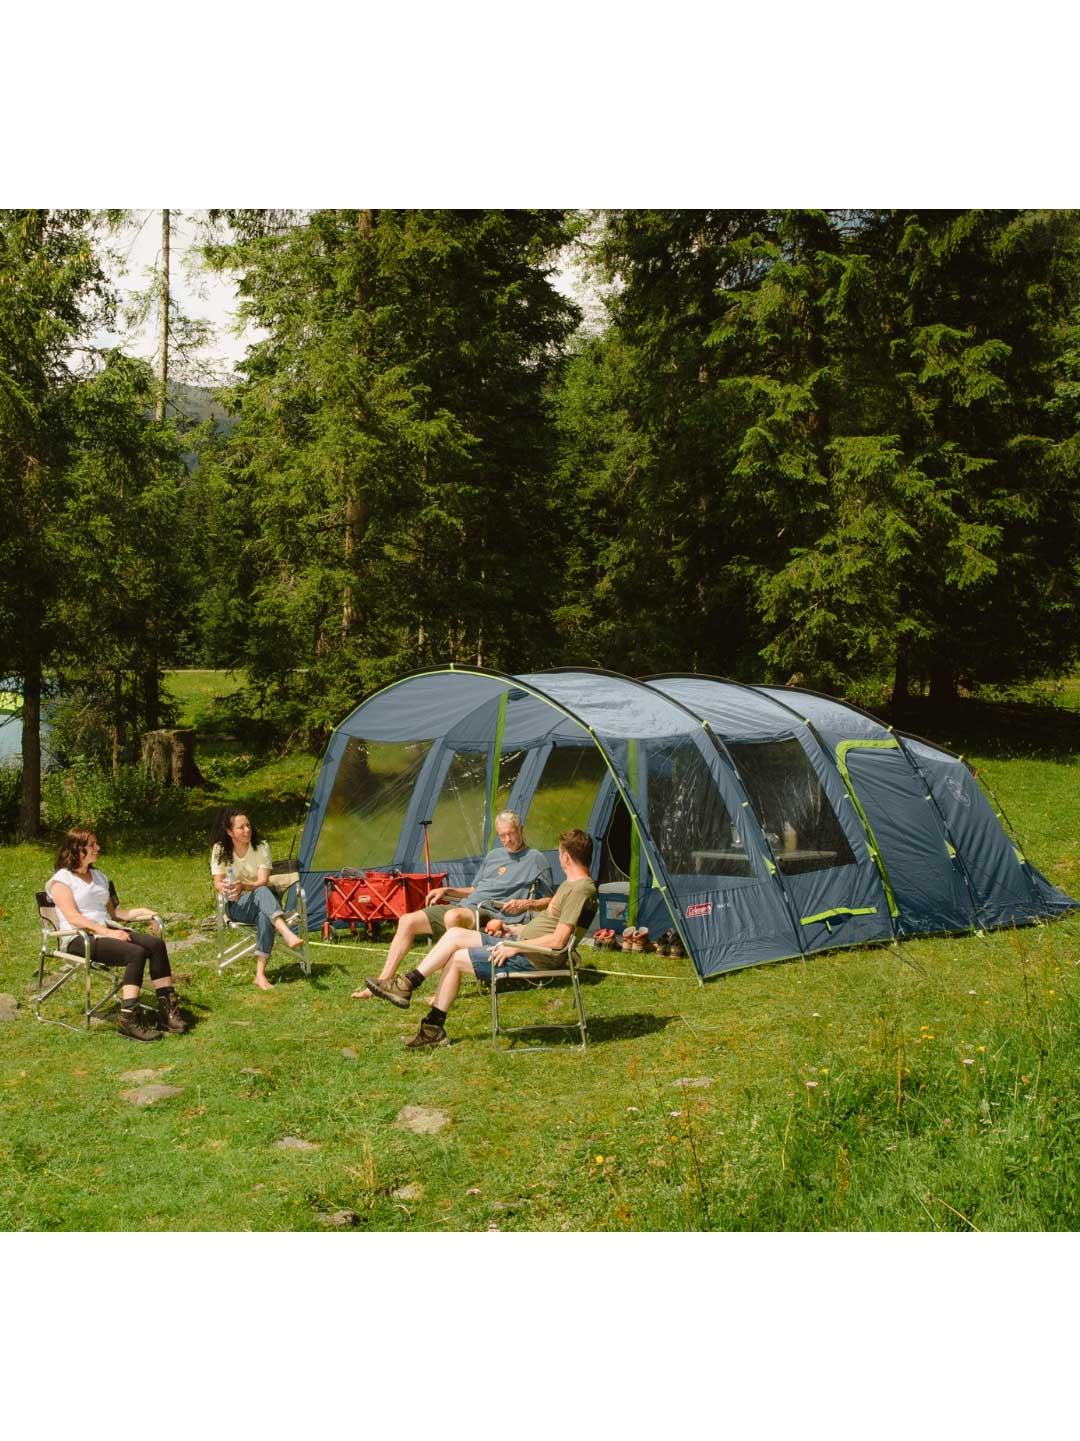 Selected image for COLEMAN Šator Vail 6 Long Tent siva